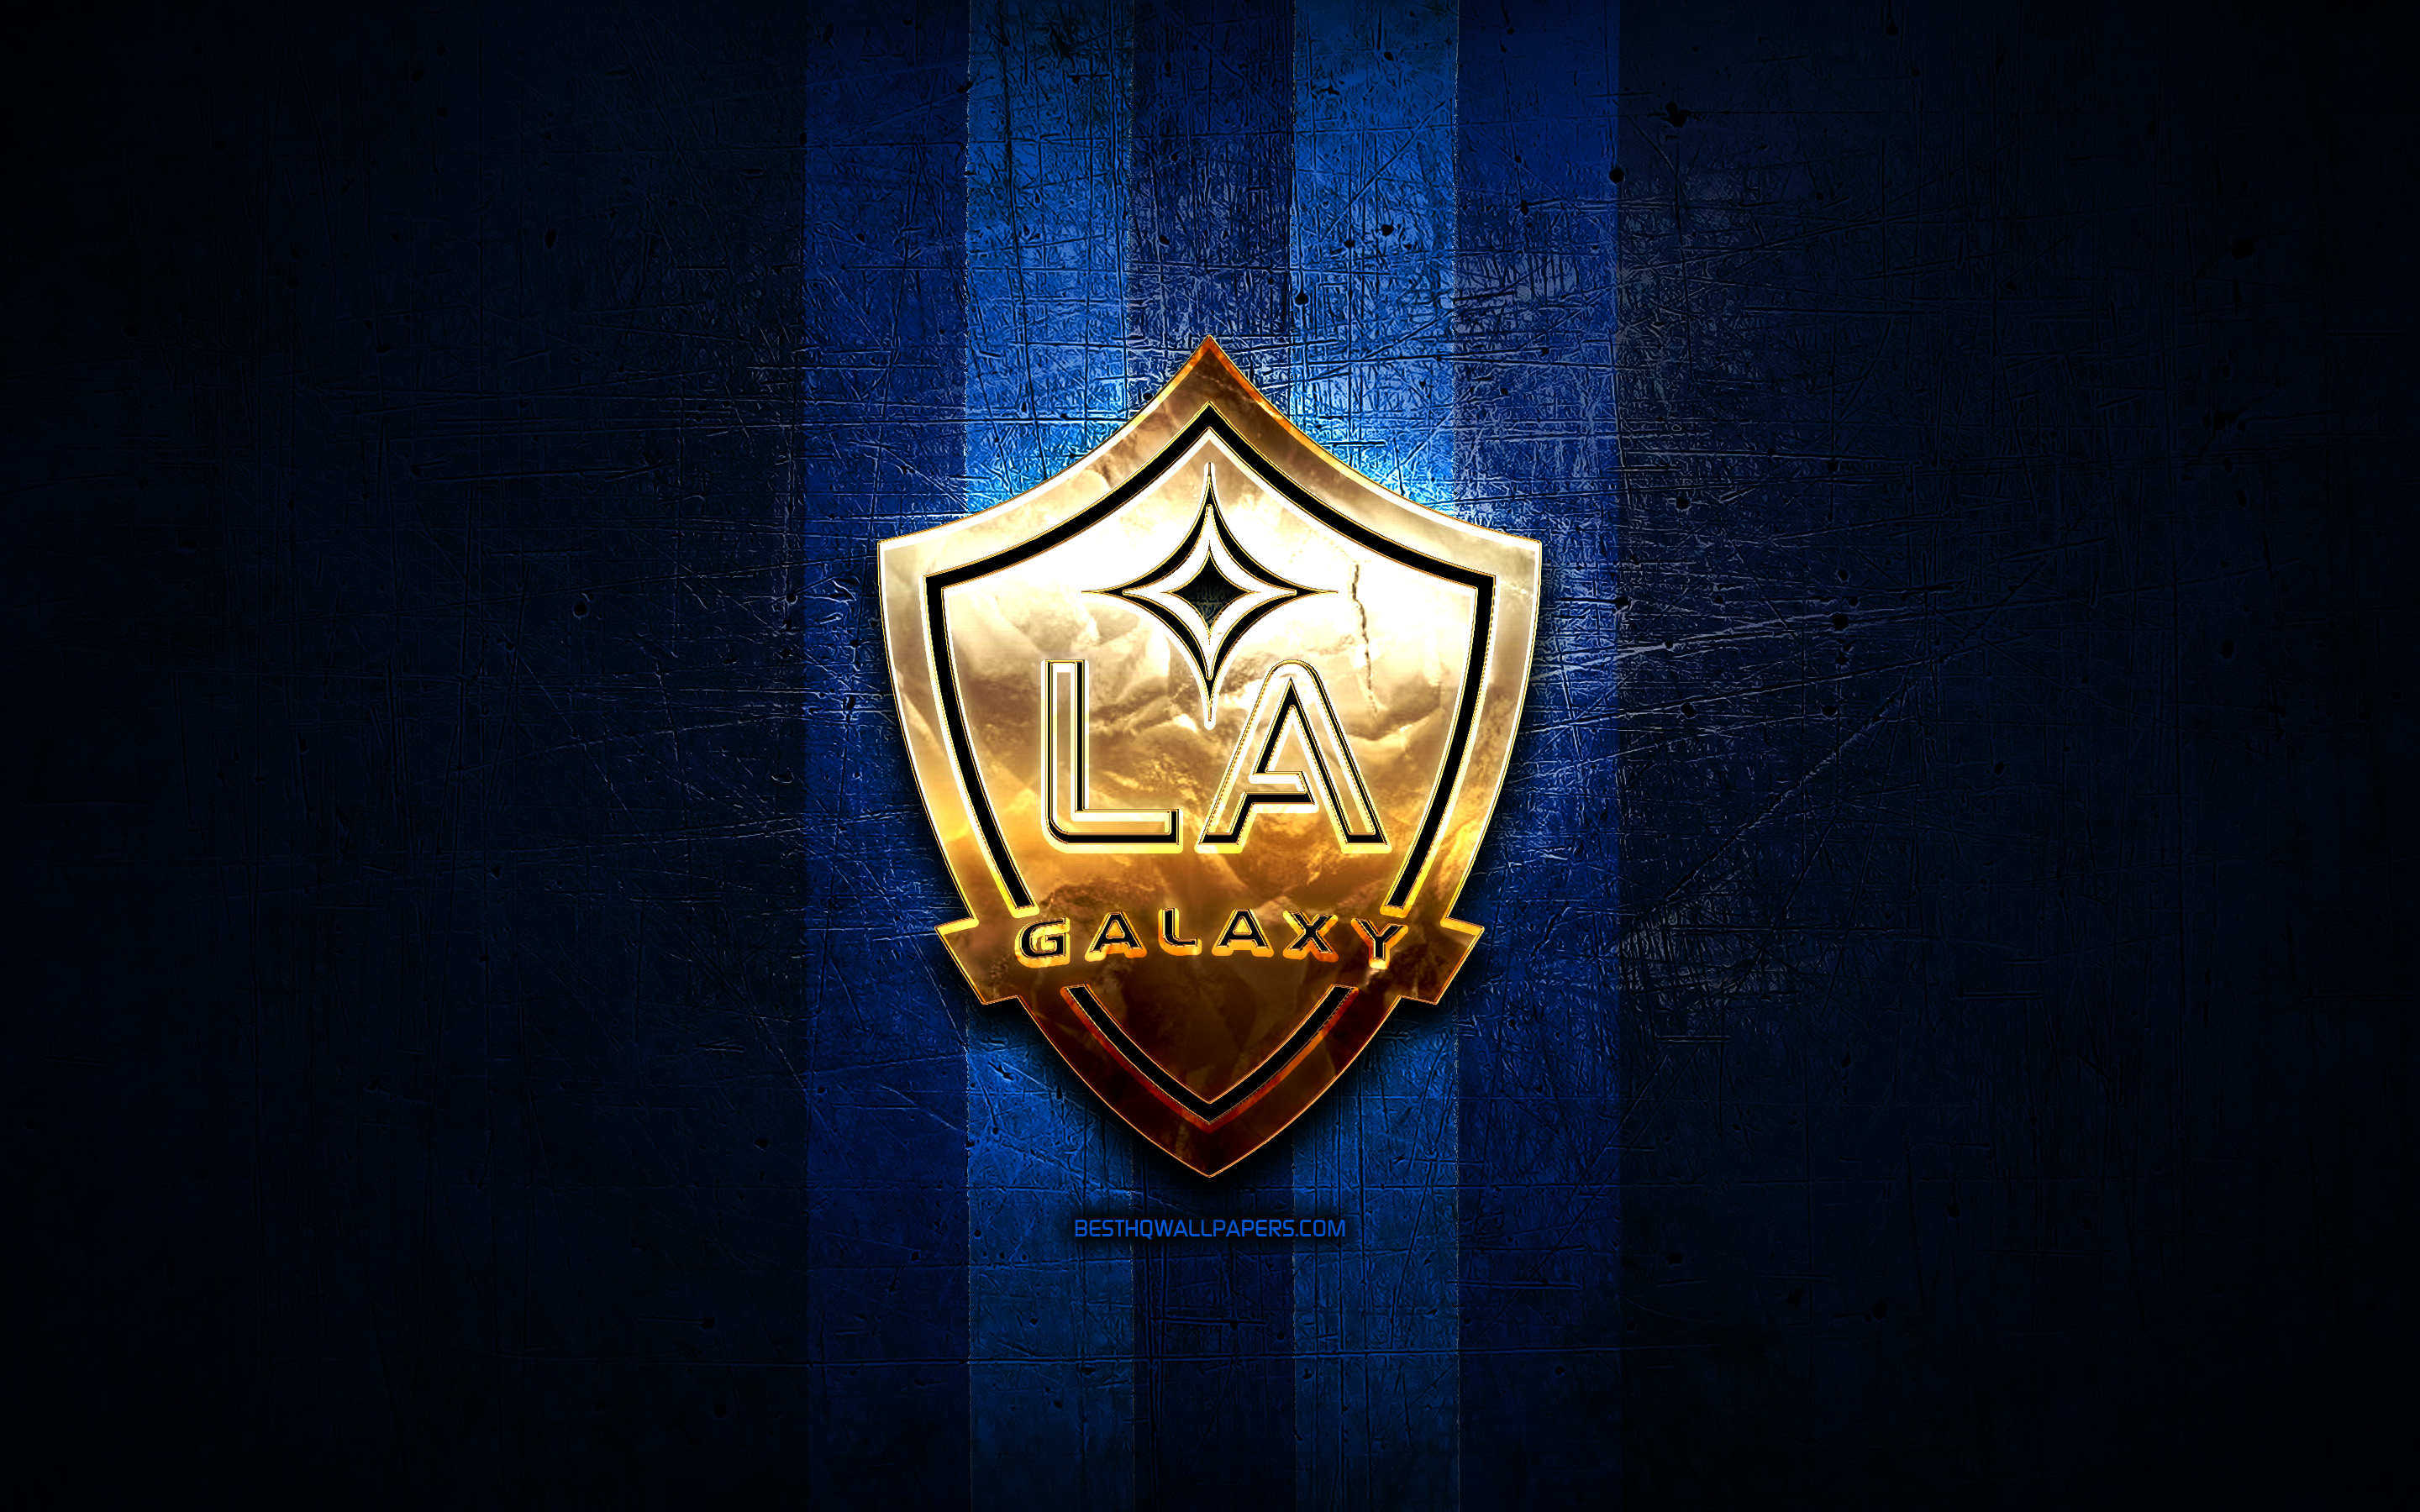 Download wallpapers Los Angeles Galaxy FC golden logo MLS blue metal  background american soccer club Los Angeles Galaxy United Soccer League  Los Angeles Galaxy logo soccer USA LA Galaxy for desktop with